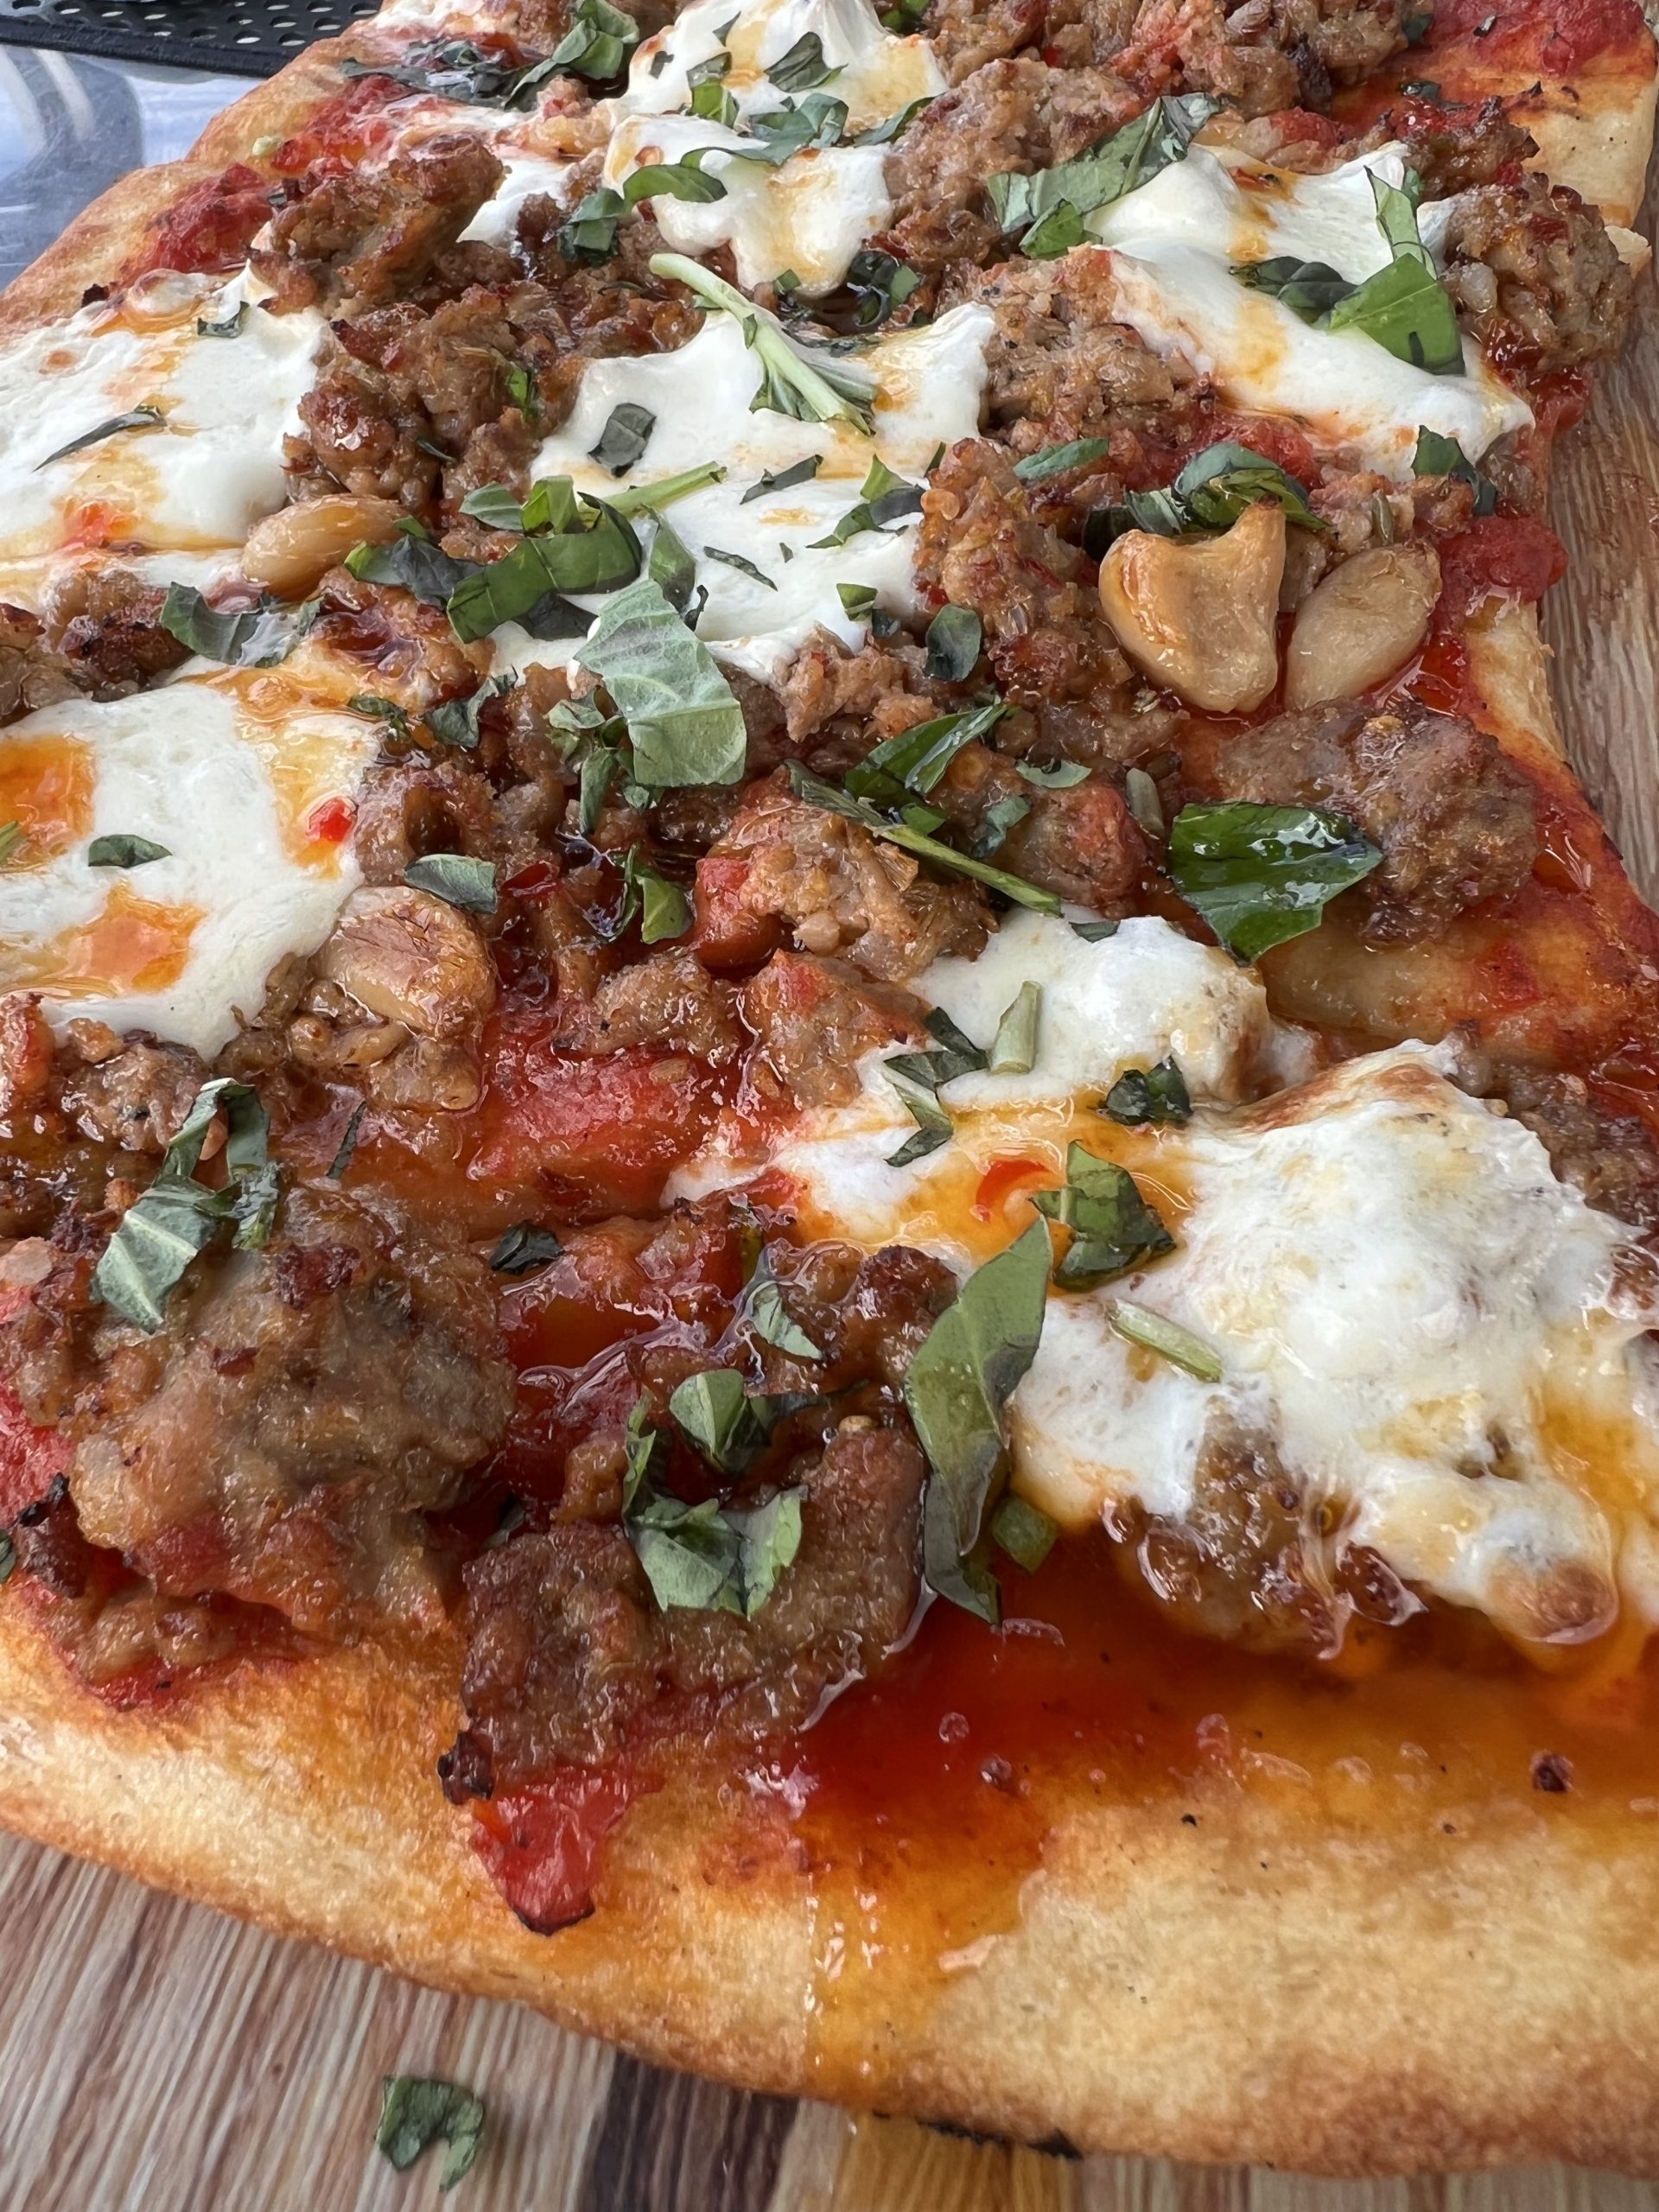 The-Sausage-and-Hot-Honey-Flatbread-in-Hingham-Massachusetts